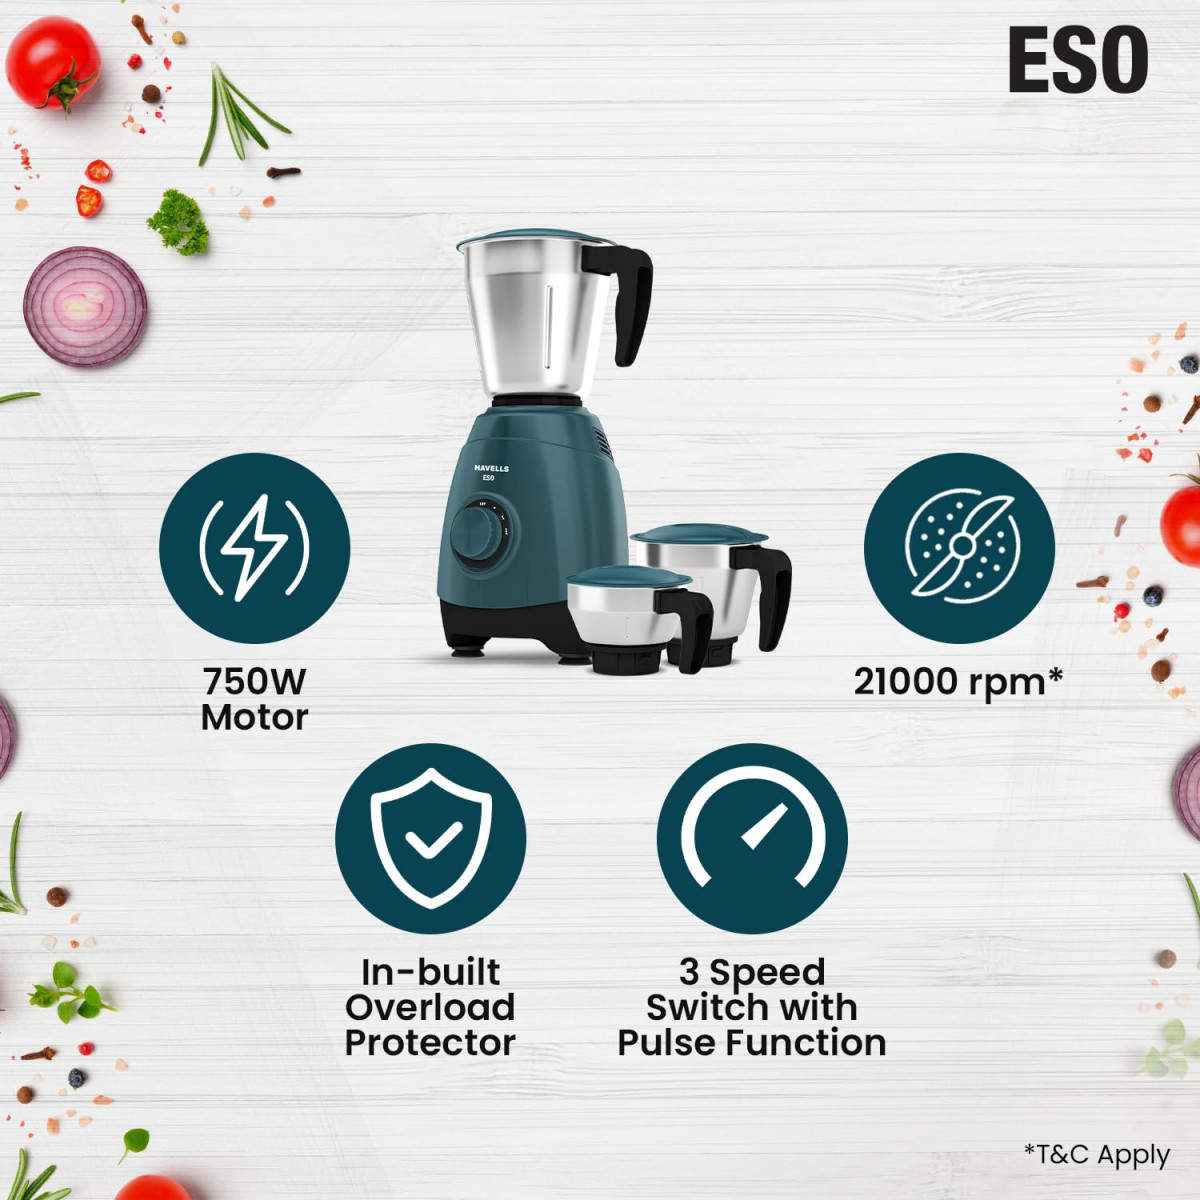 Havells ESO 750 watts 3 JAR Mixer Grinder 304 SS Blades High Speed 21000 RPM motor Heavy and Wider mouth SS Jars All Jars with Handle 2 Year Product  5 Year Motor Warranty Teal  ABS